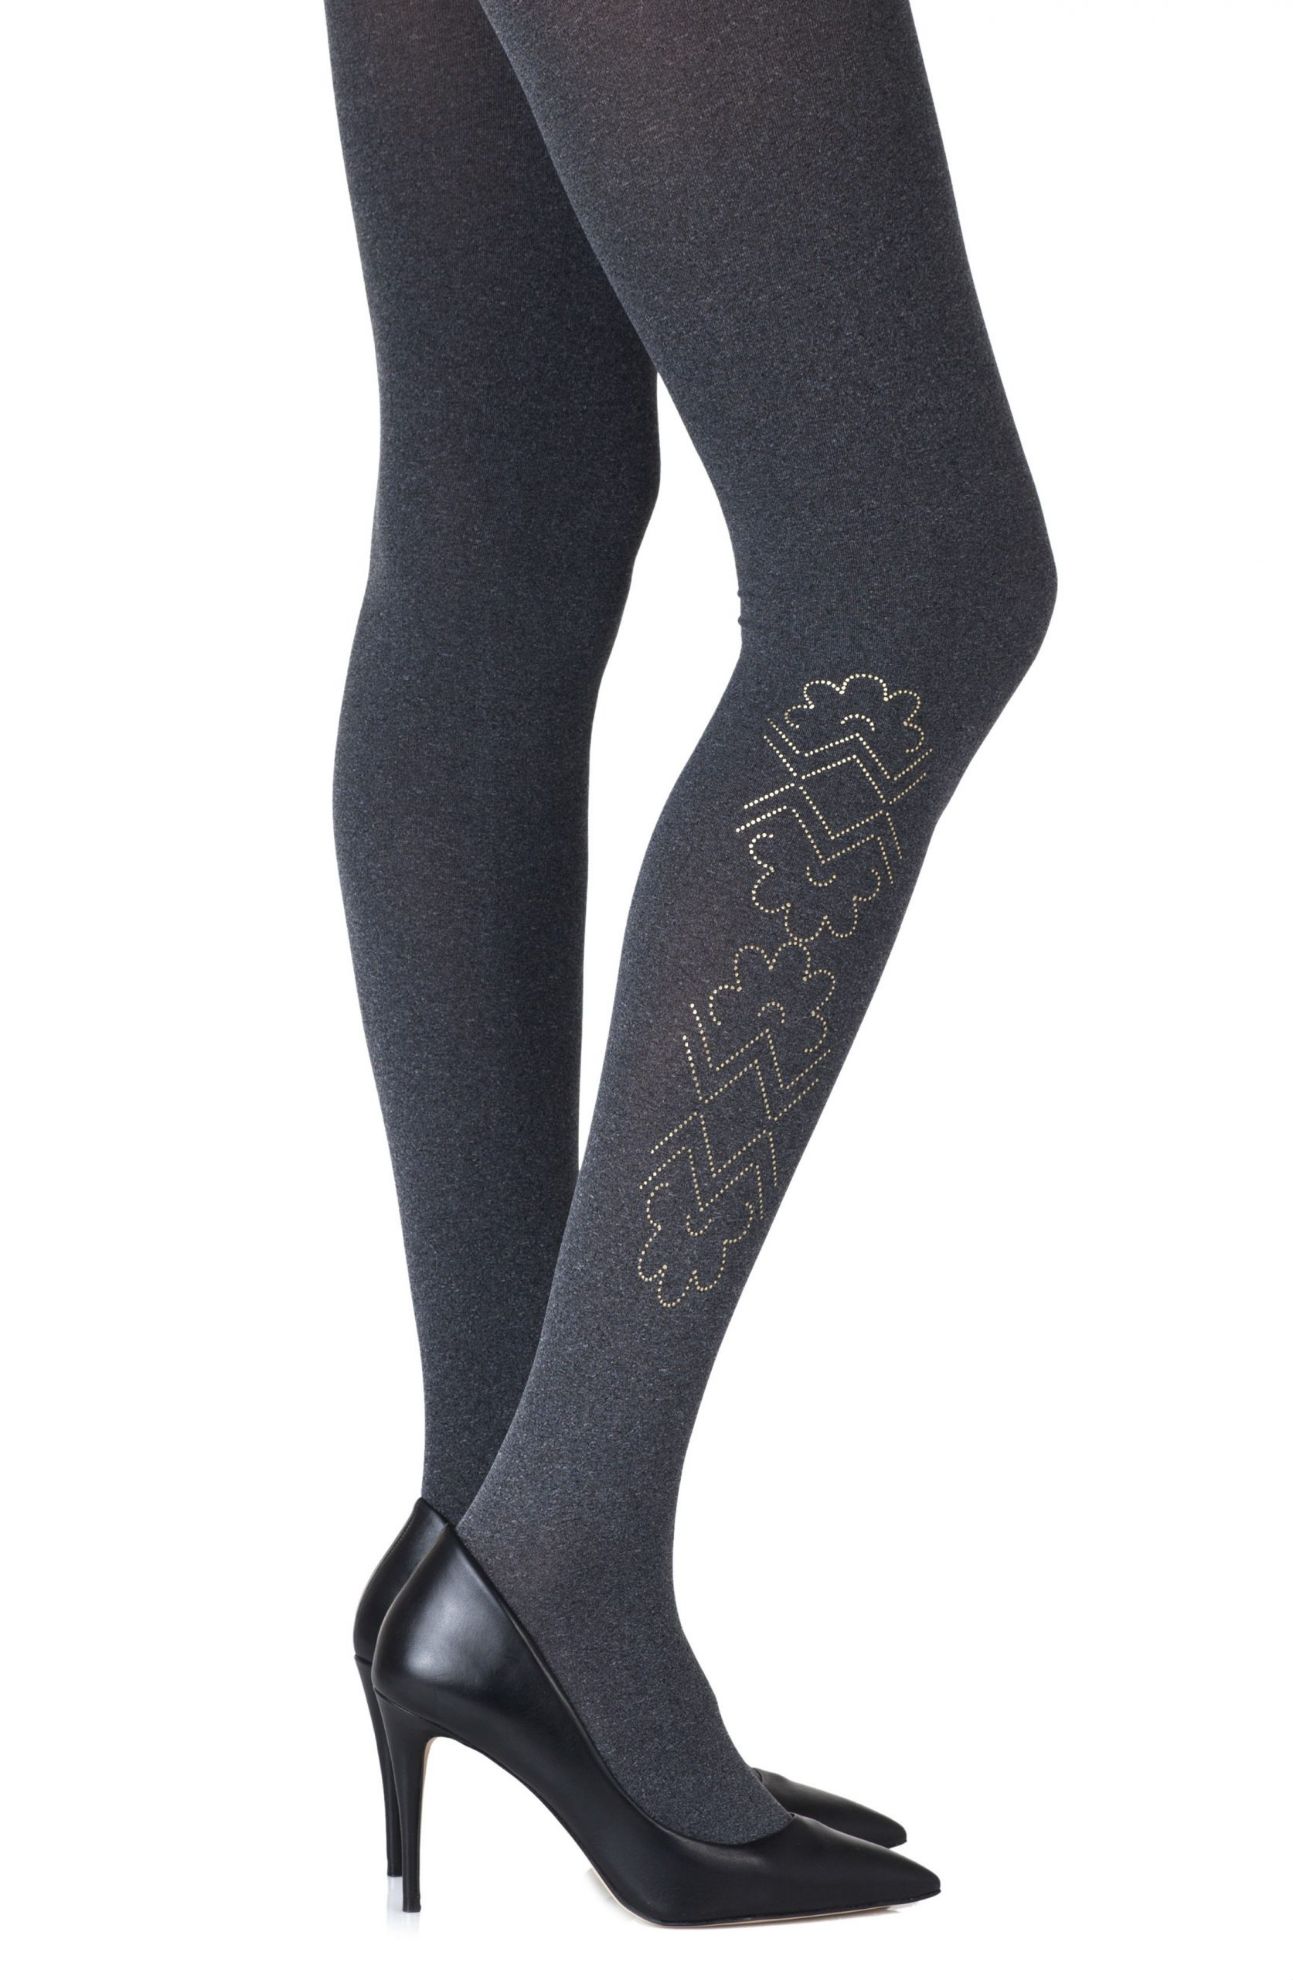 Picture of Zohara "Caught In The Metal" Heather Grey Print Tights